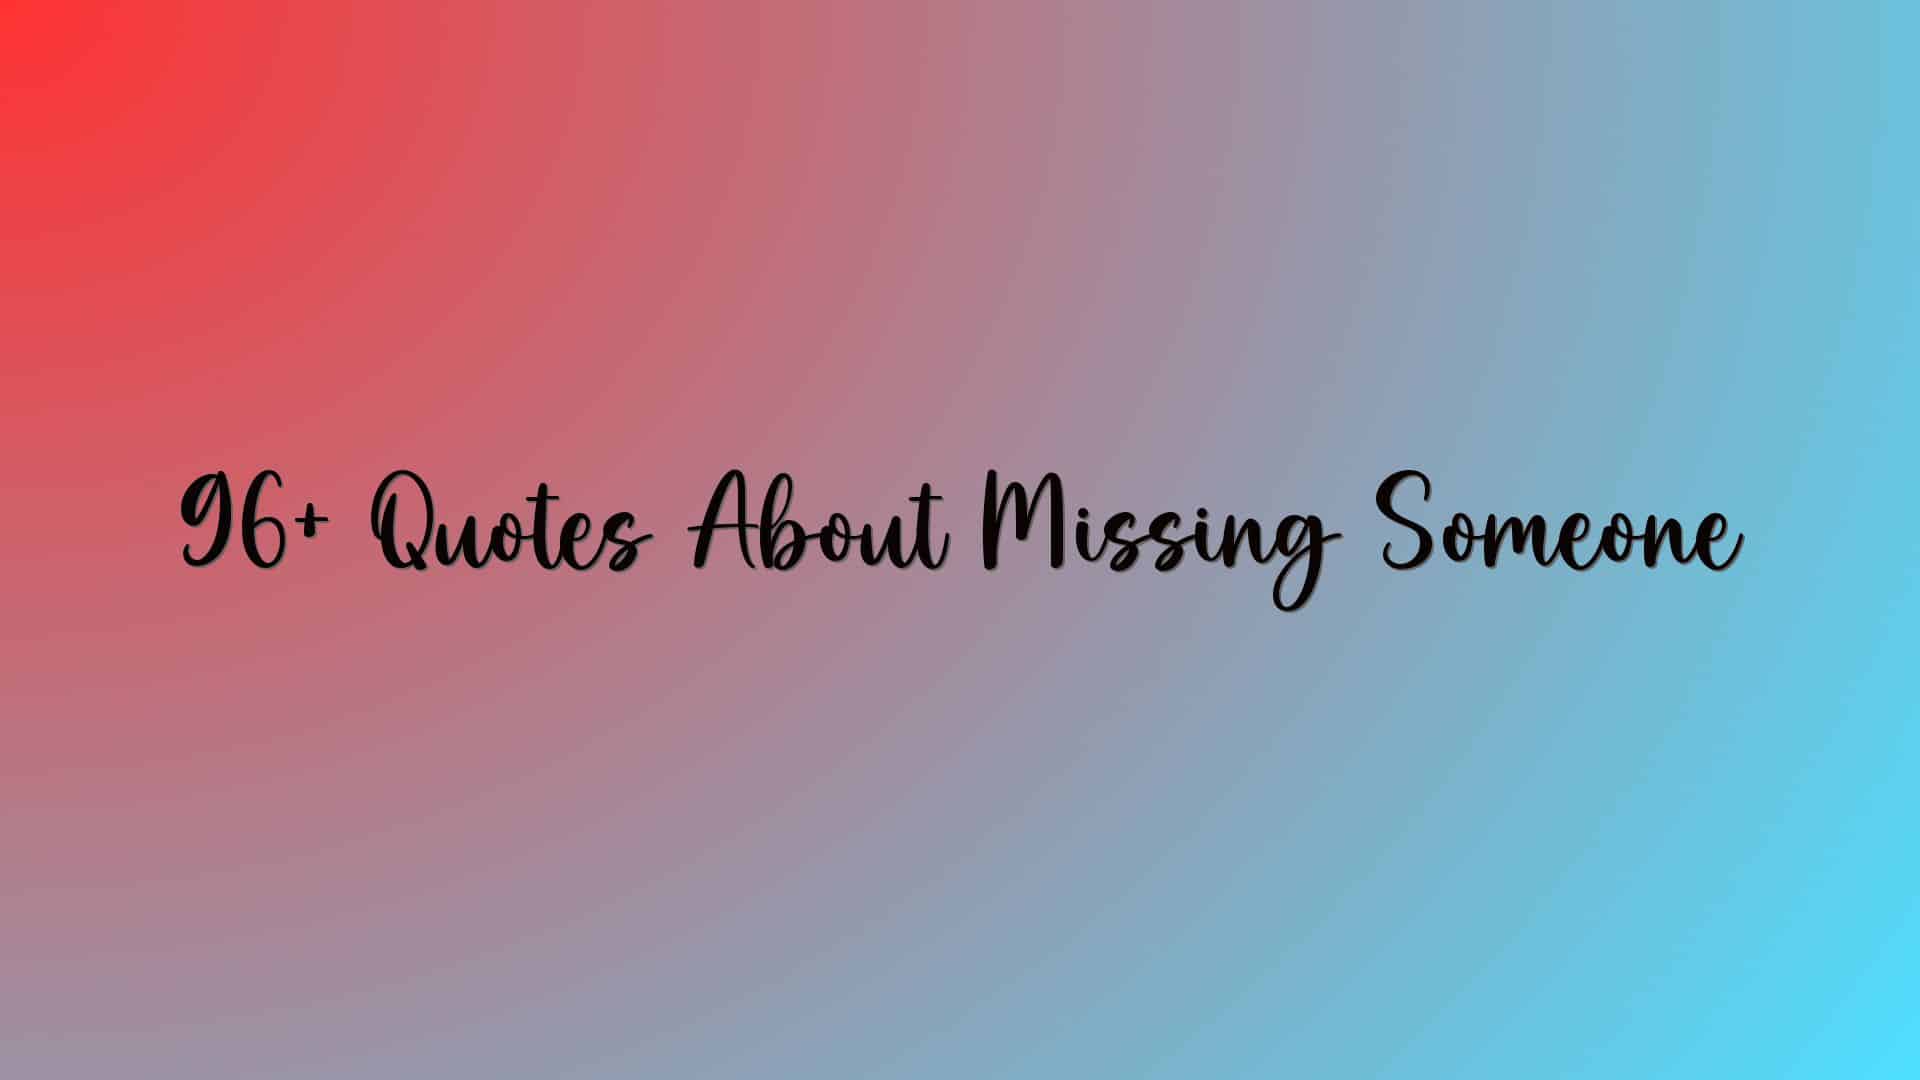 96+ Quotes About Missing Someone